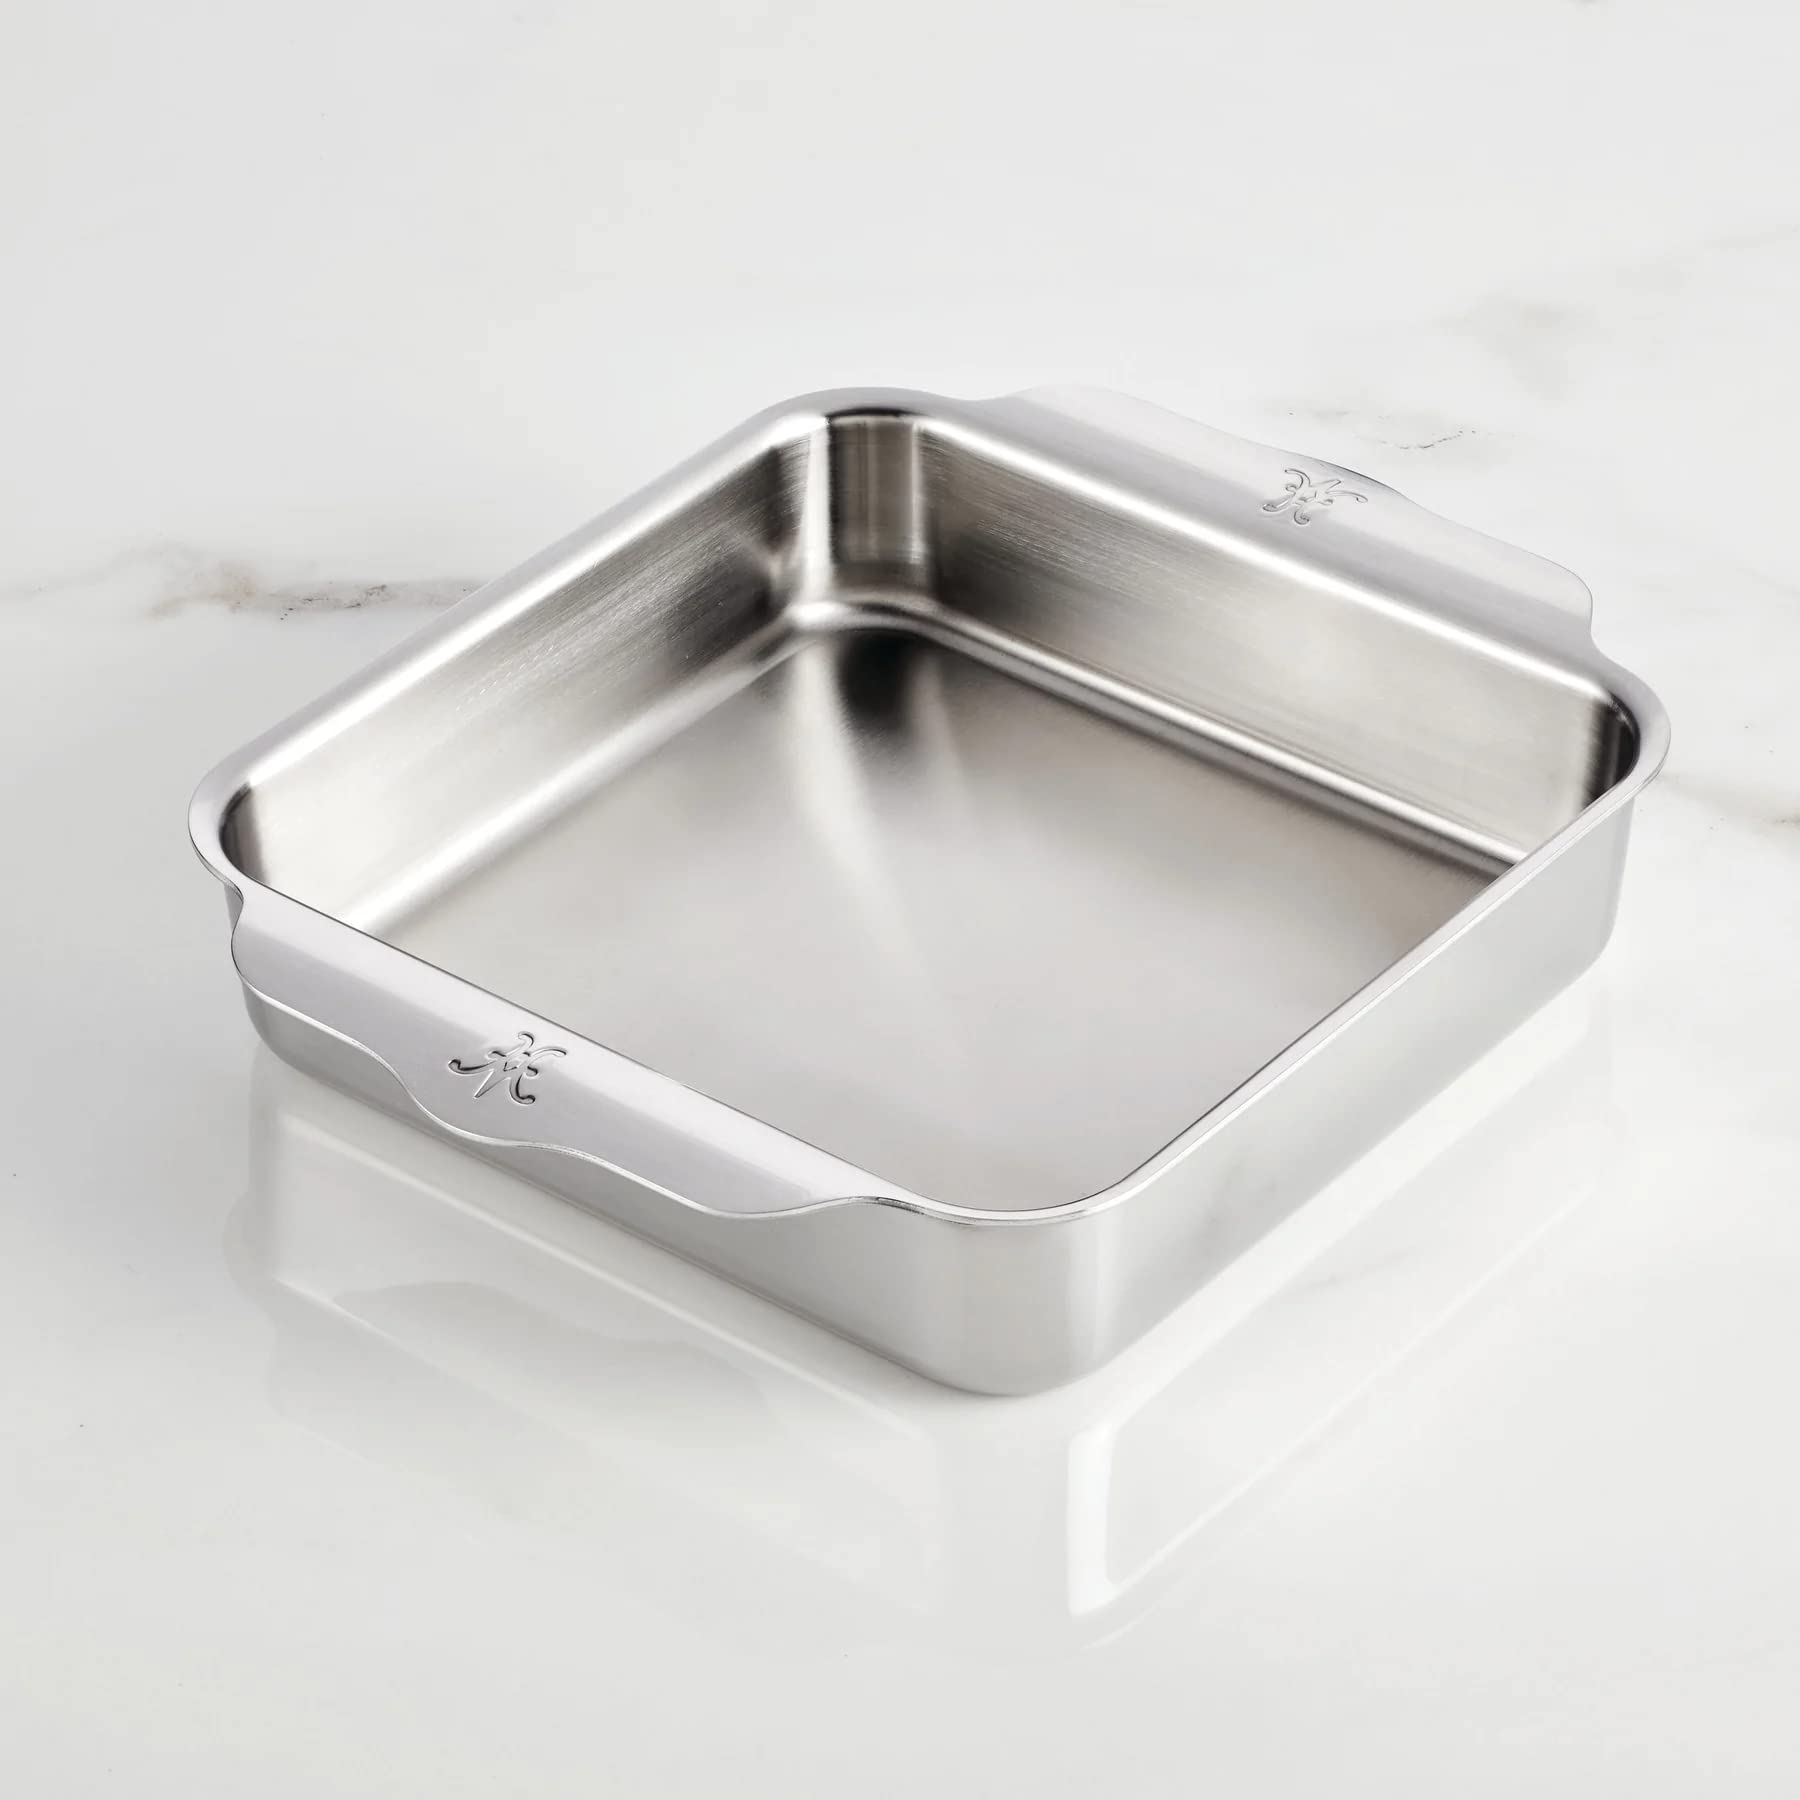 Hestan - OvenBond Collection - Stainless Steel Square Baker Pan, 8 Inch